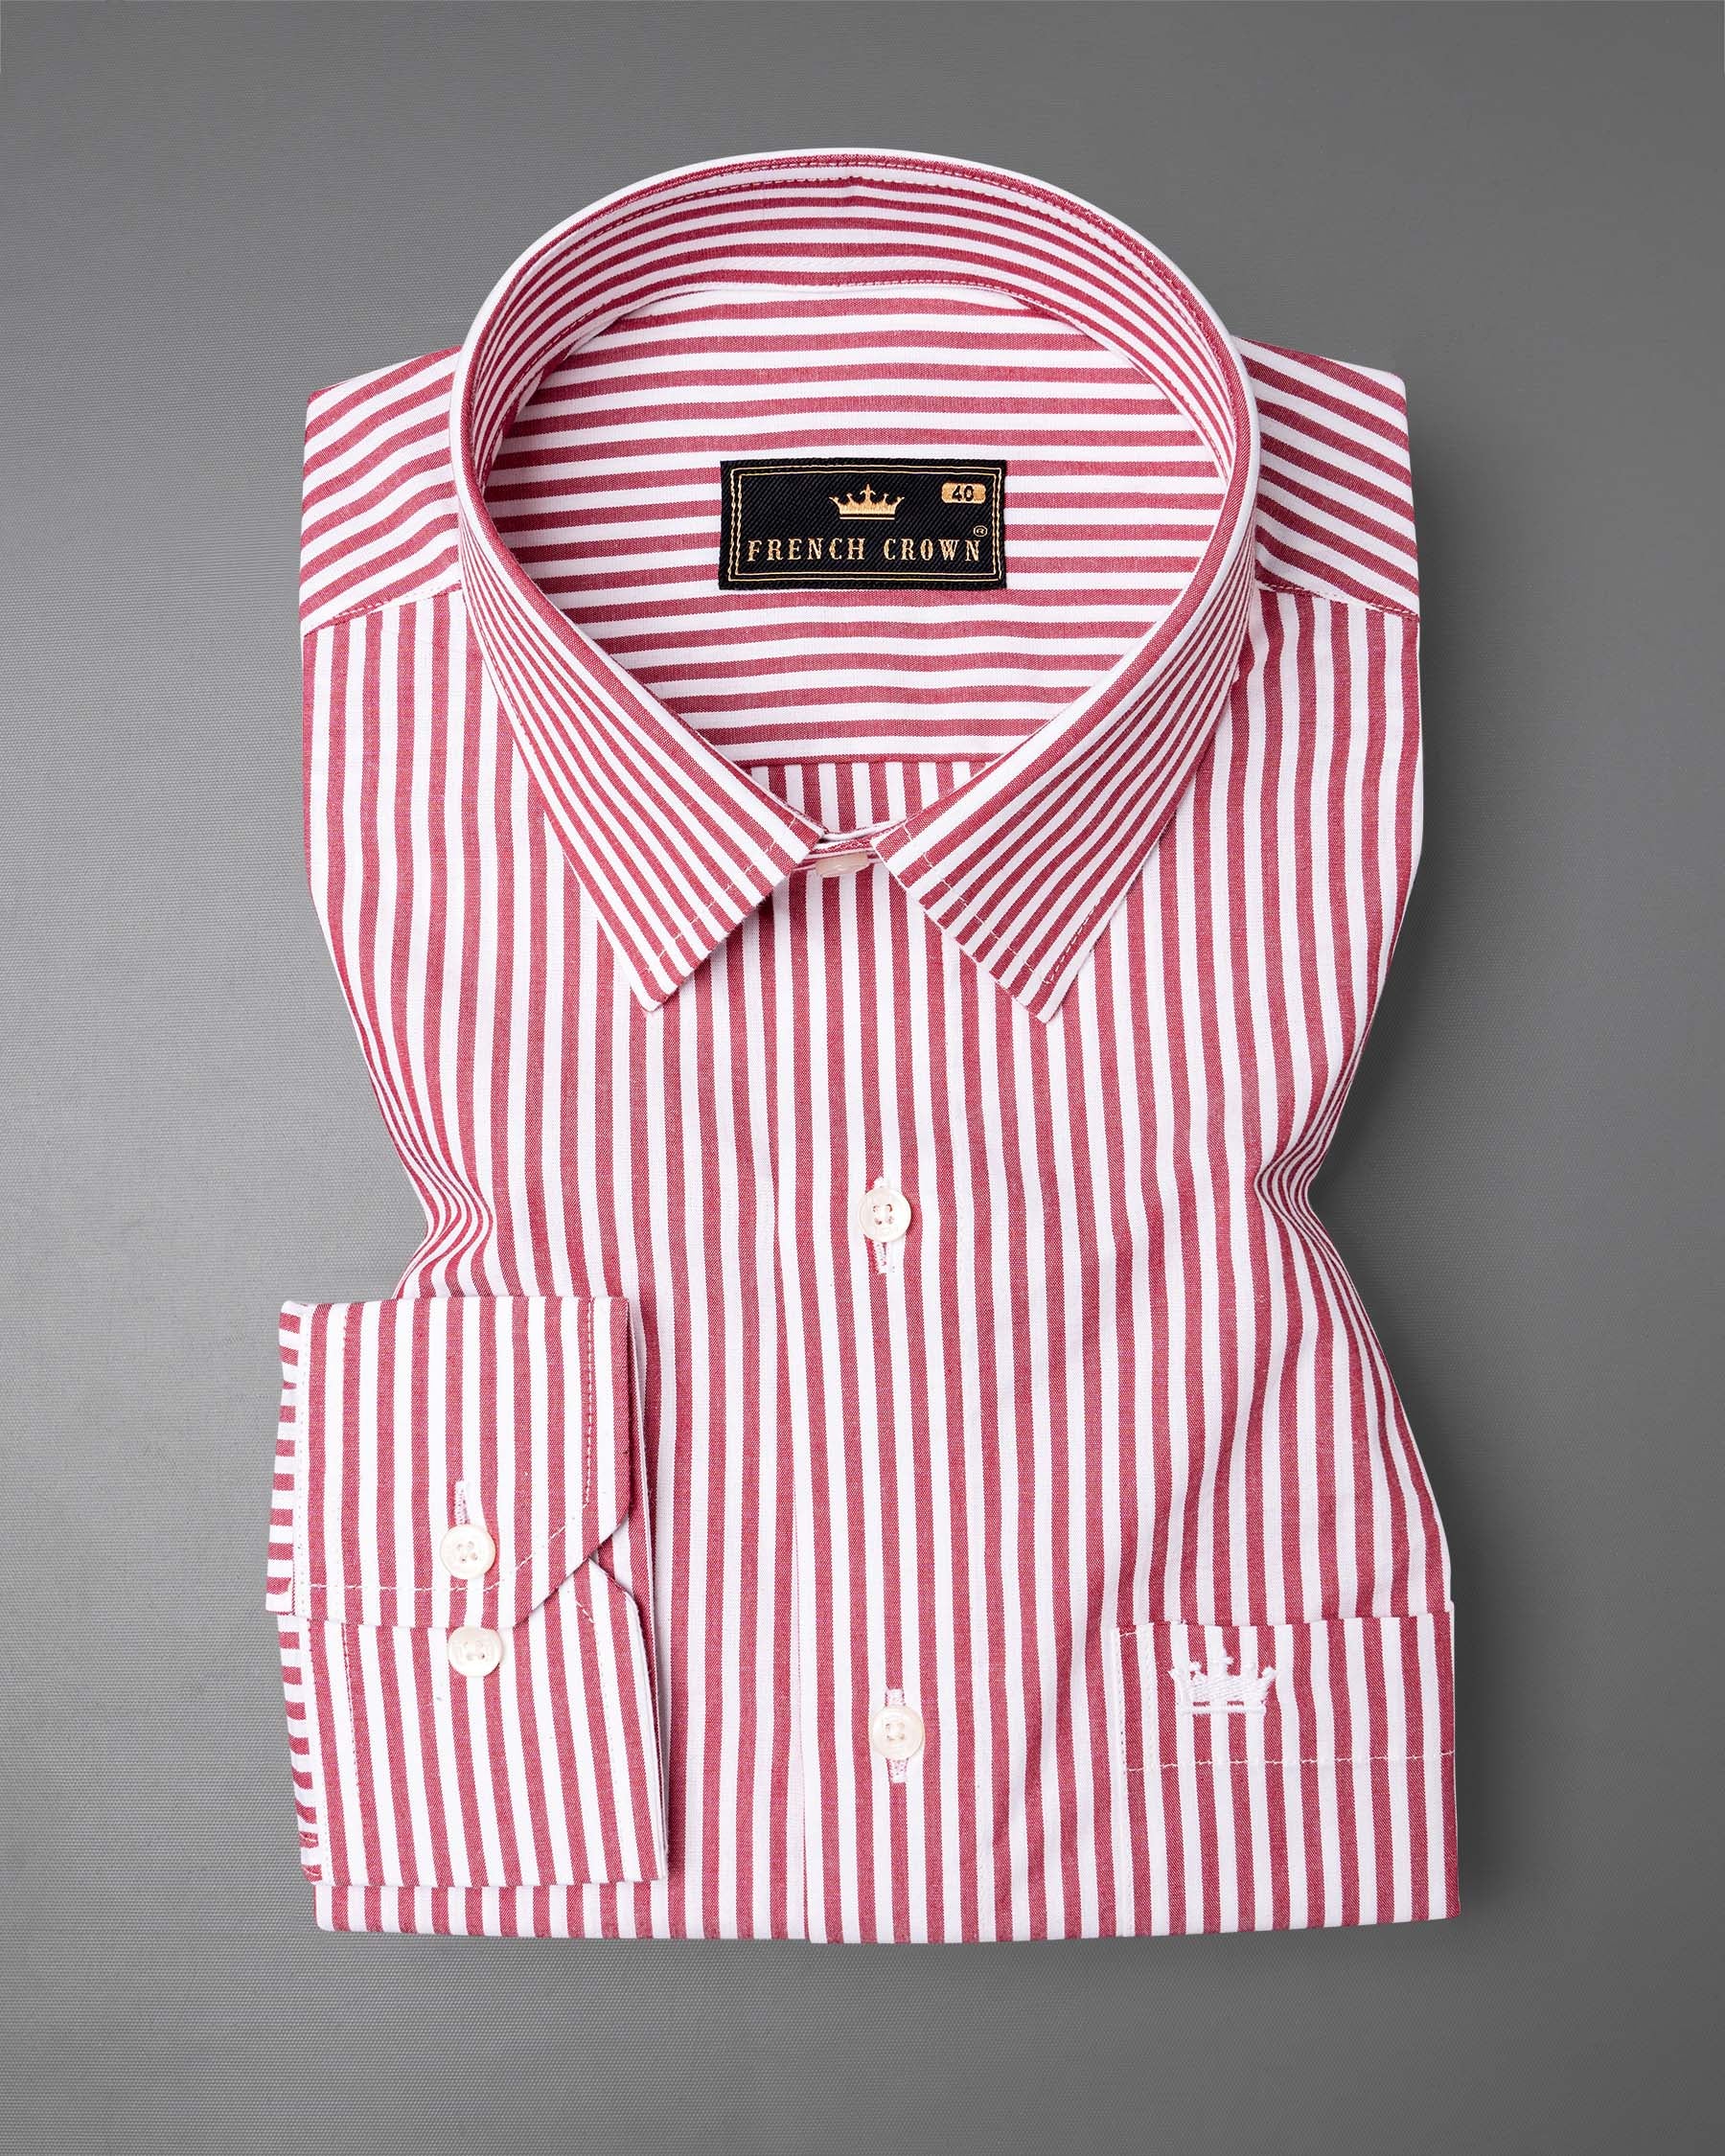 Red and White Striped Premium Cotton Shirt 6686-38,6686-38,6686-39,6686-39,6686-40,6686-40,6686-42,6686-42,6686-44,6686-44,6686-46,6686-46,6686-48,6686-48,6686-50,6686-50,6686-52,6686-52